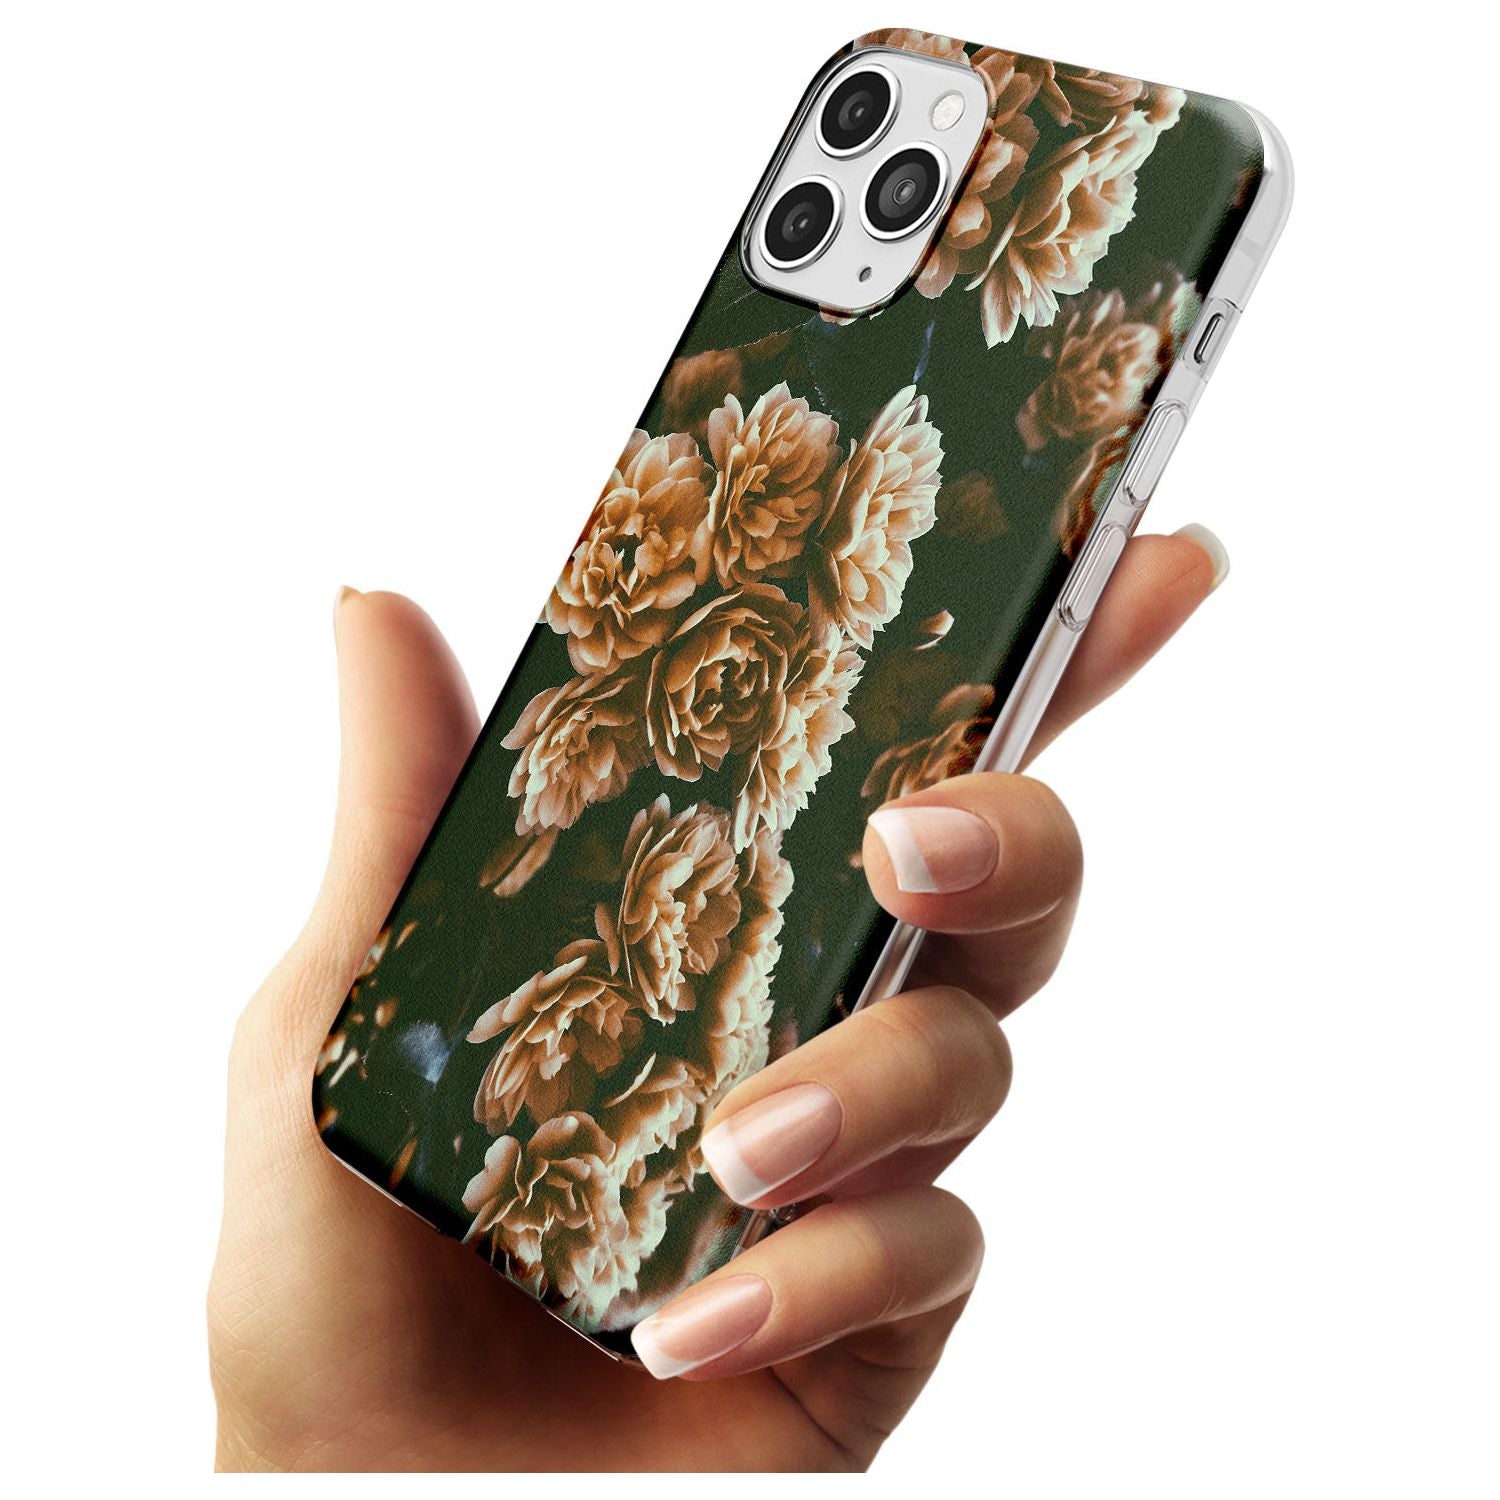 White Peonies - Real Floral Photographs Slim TPU Phone Case for iPhone 11 Pro Max